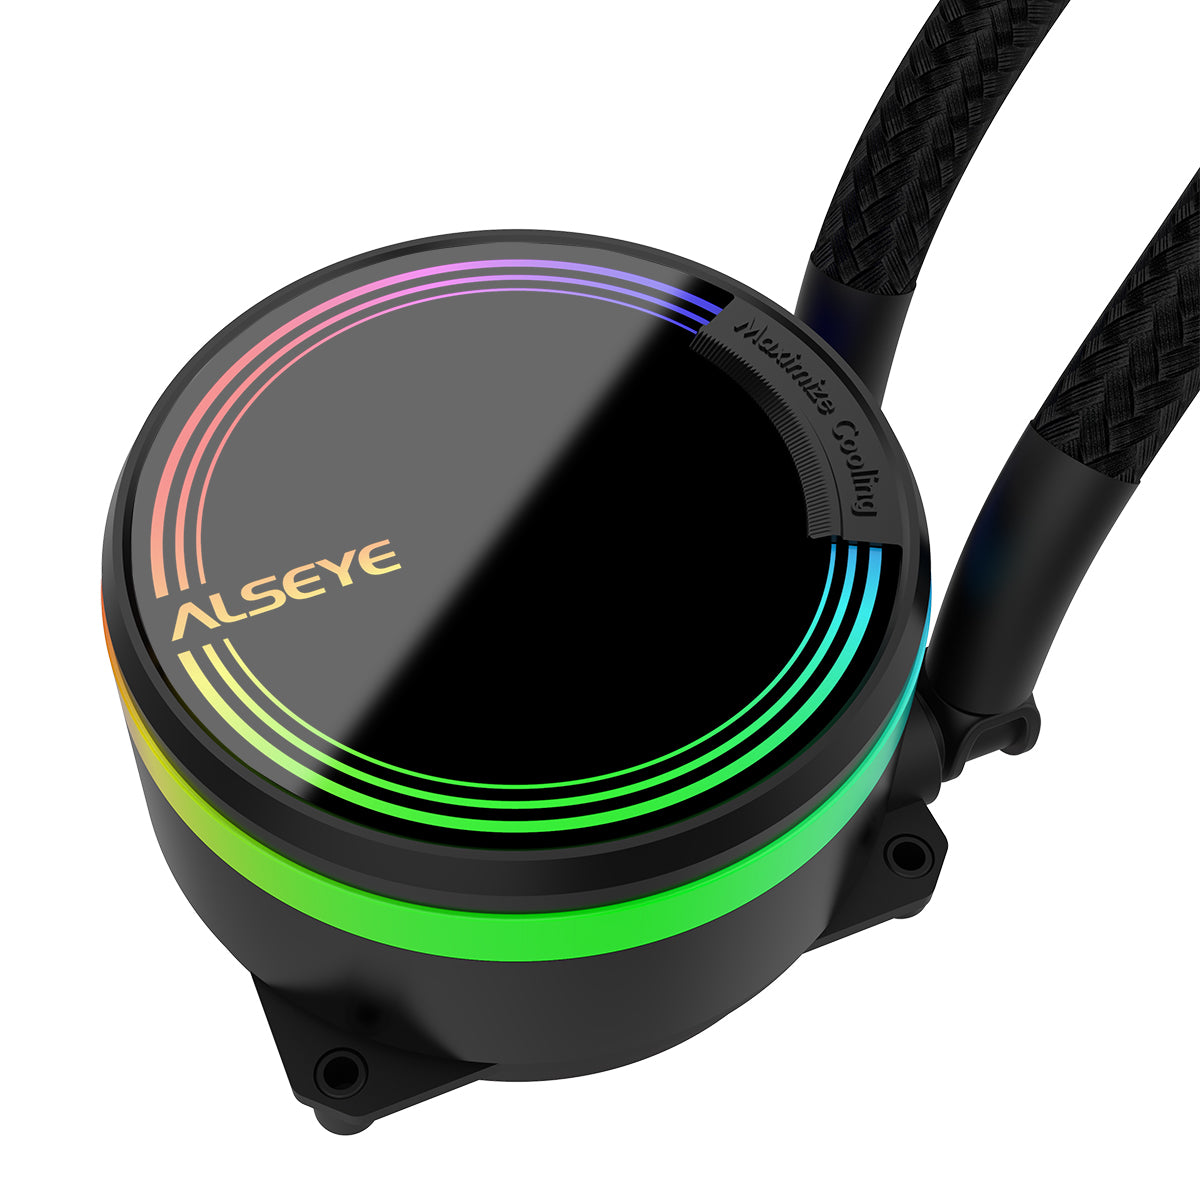 Alseye M120 Max Series Liquid Cooler with RGB Lighting for Intel and AMD Processors